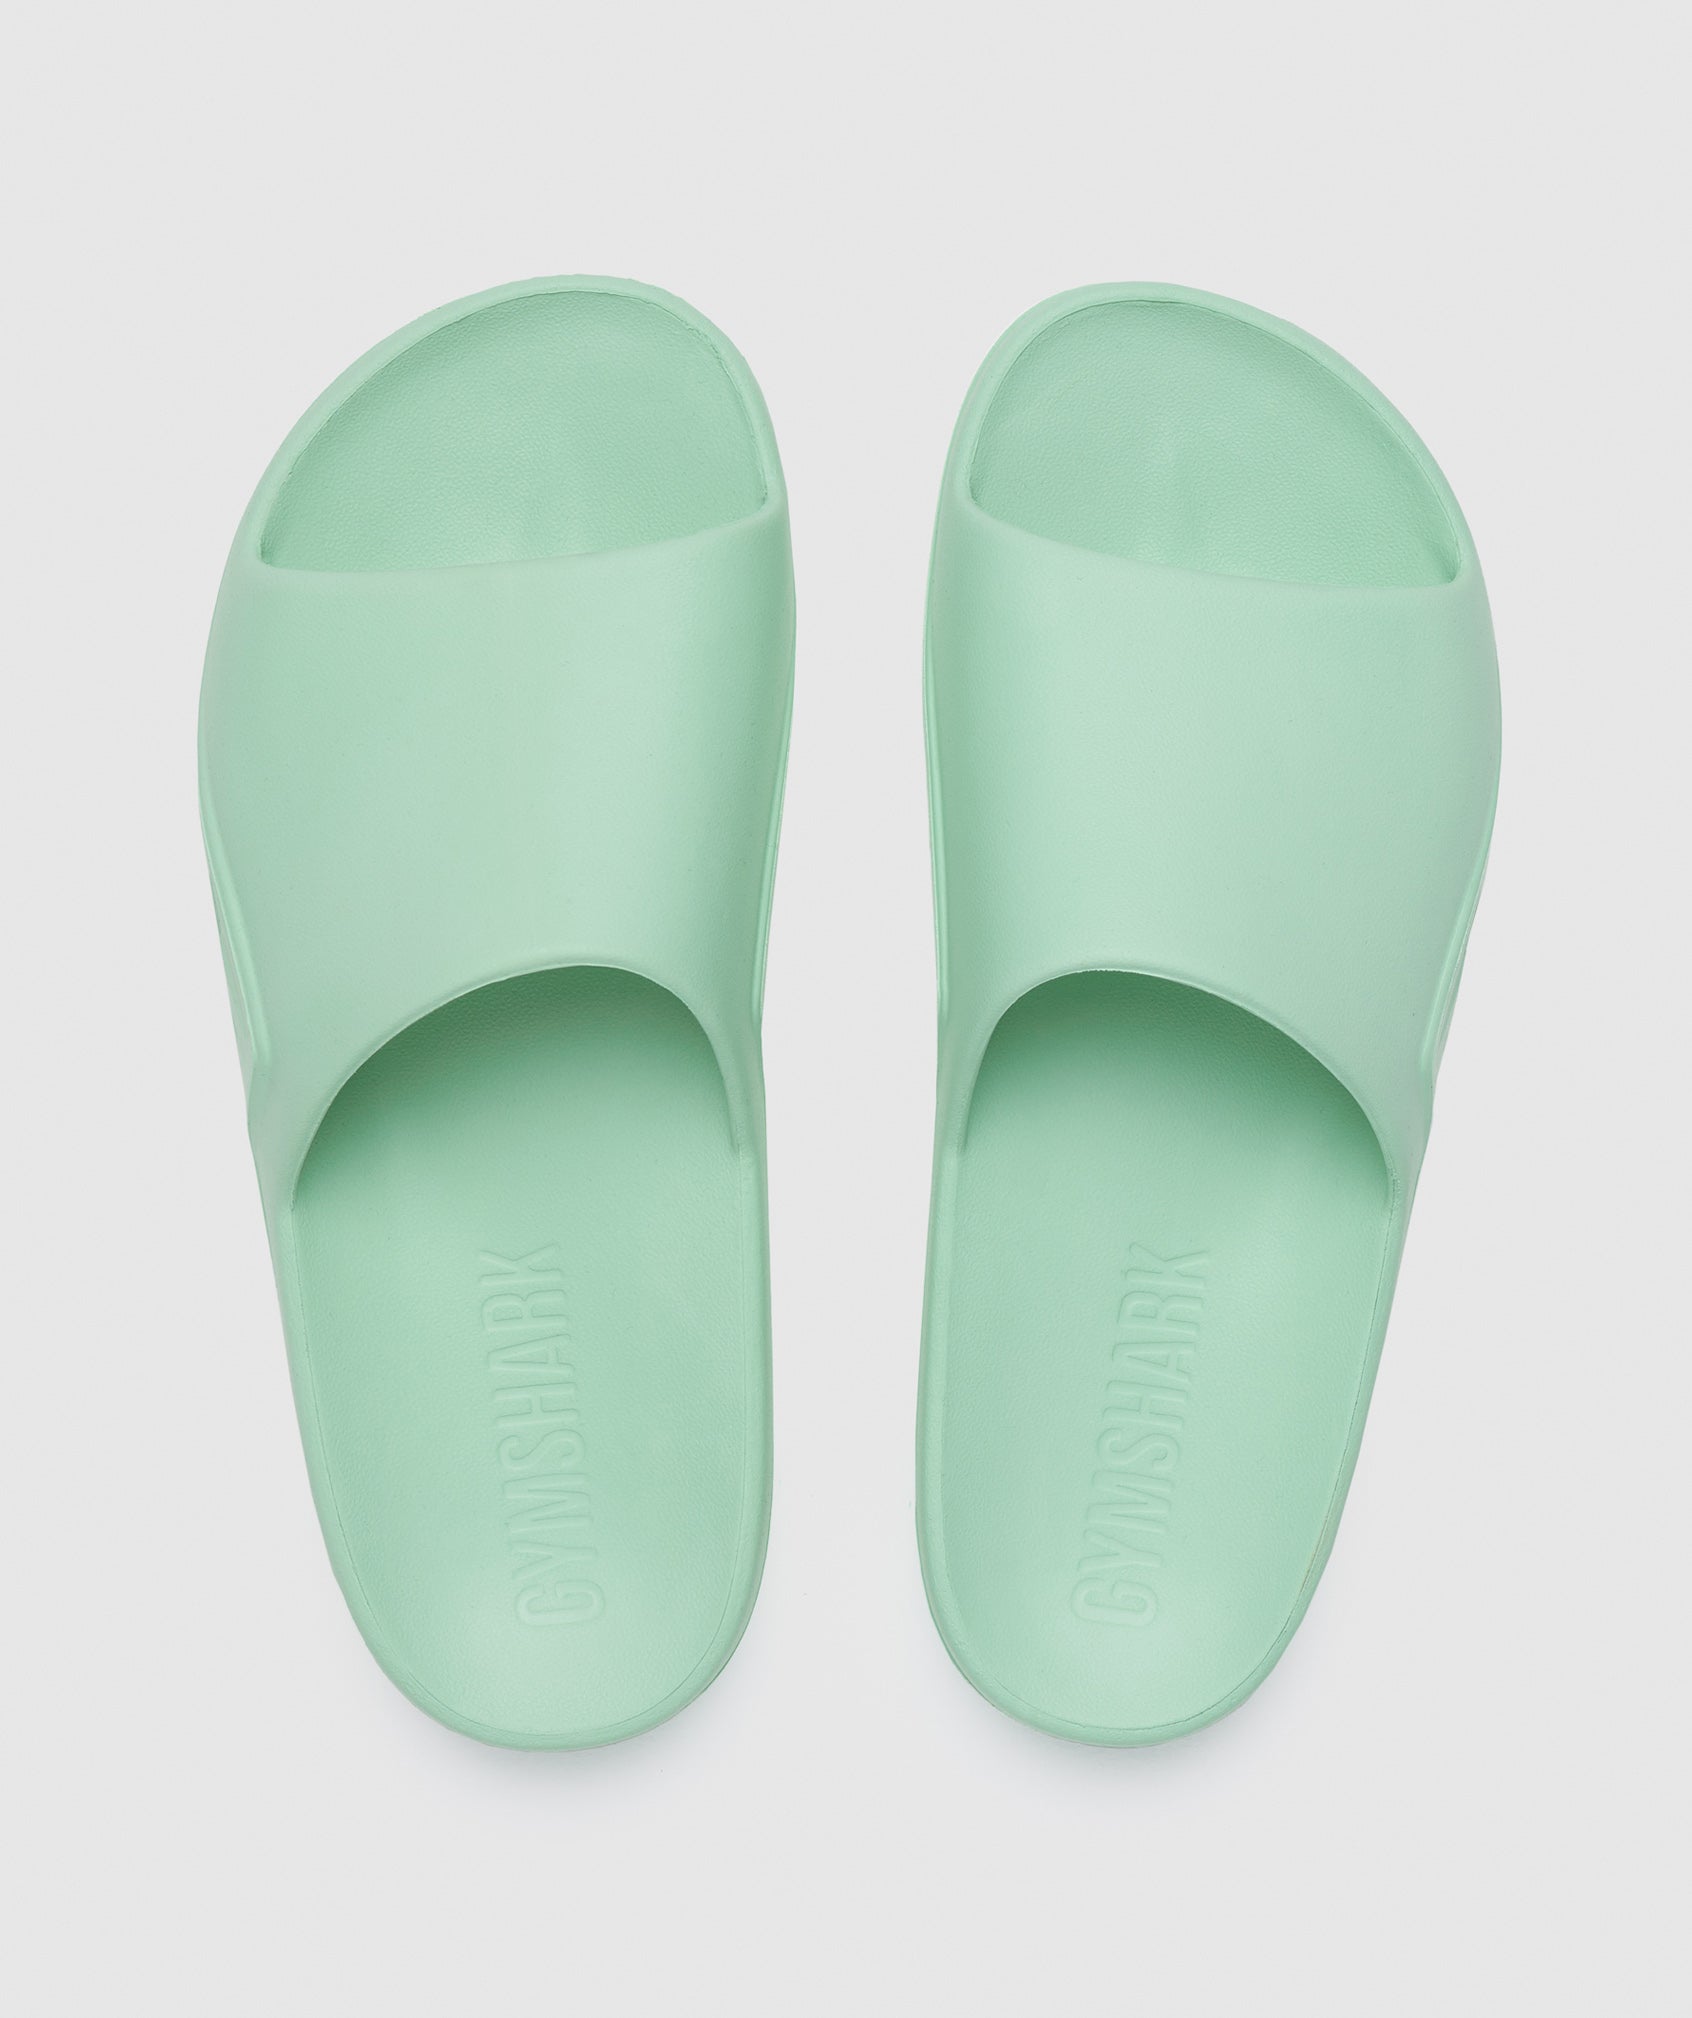 Rest Day Slides in Pastel Green - view 2